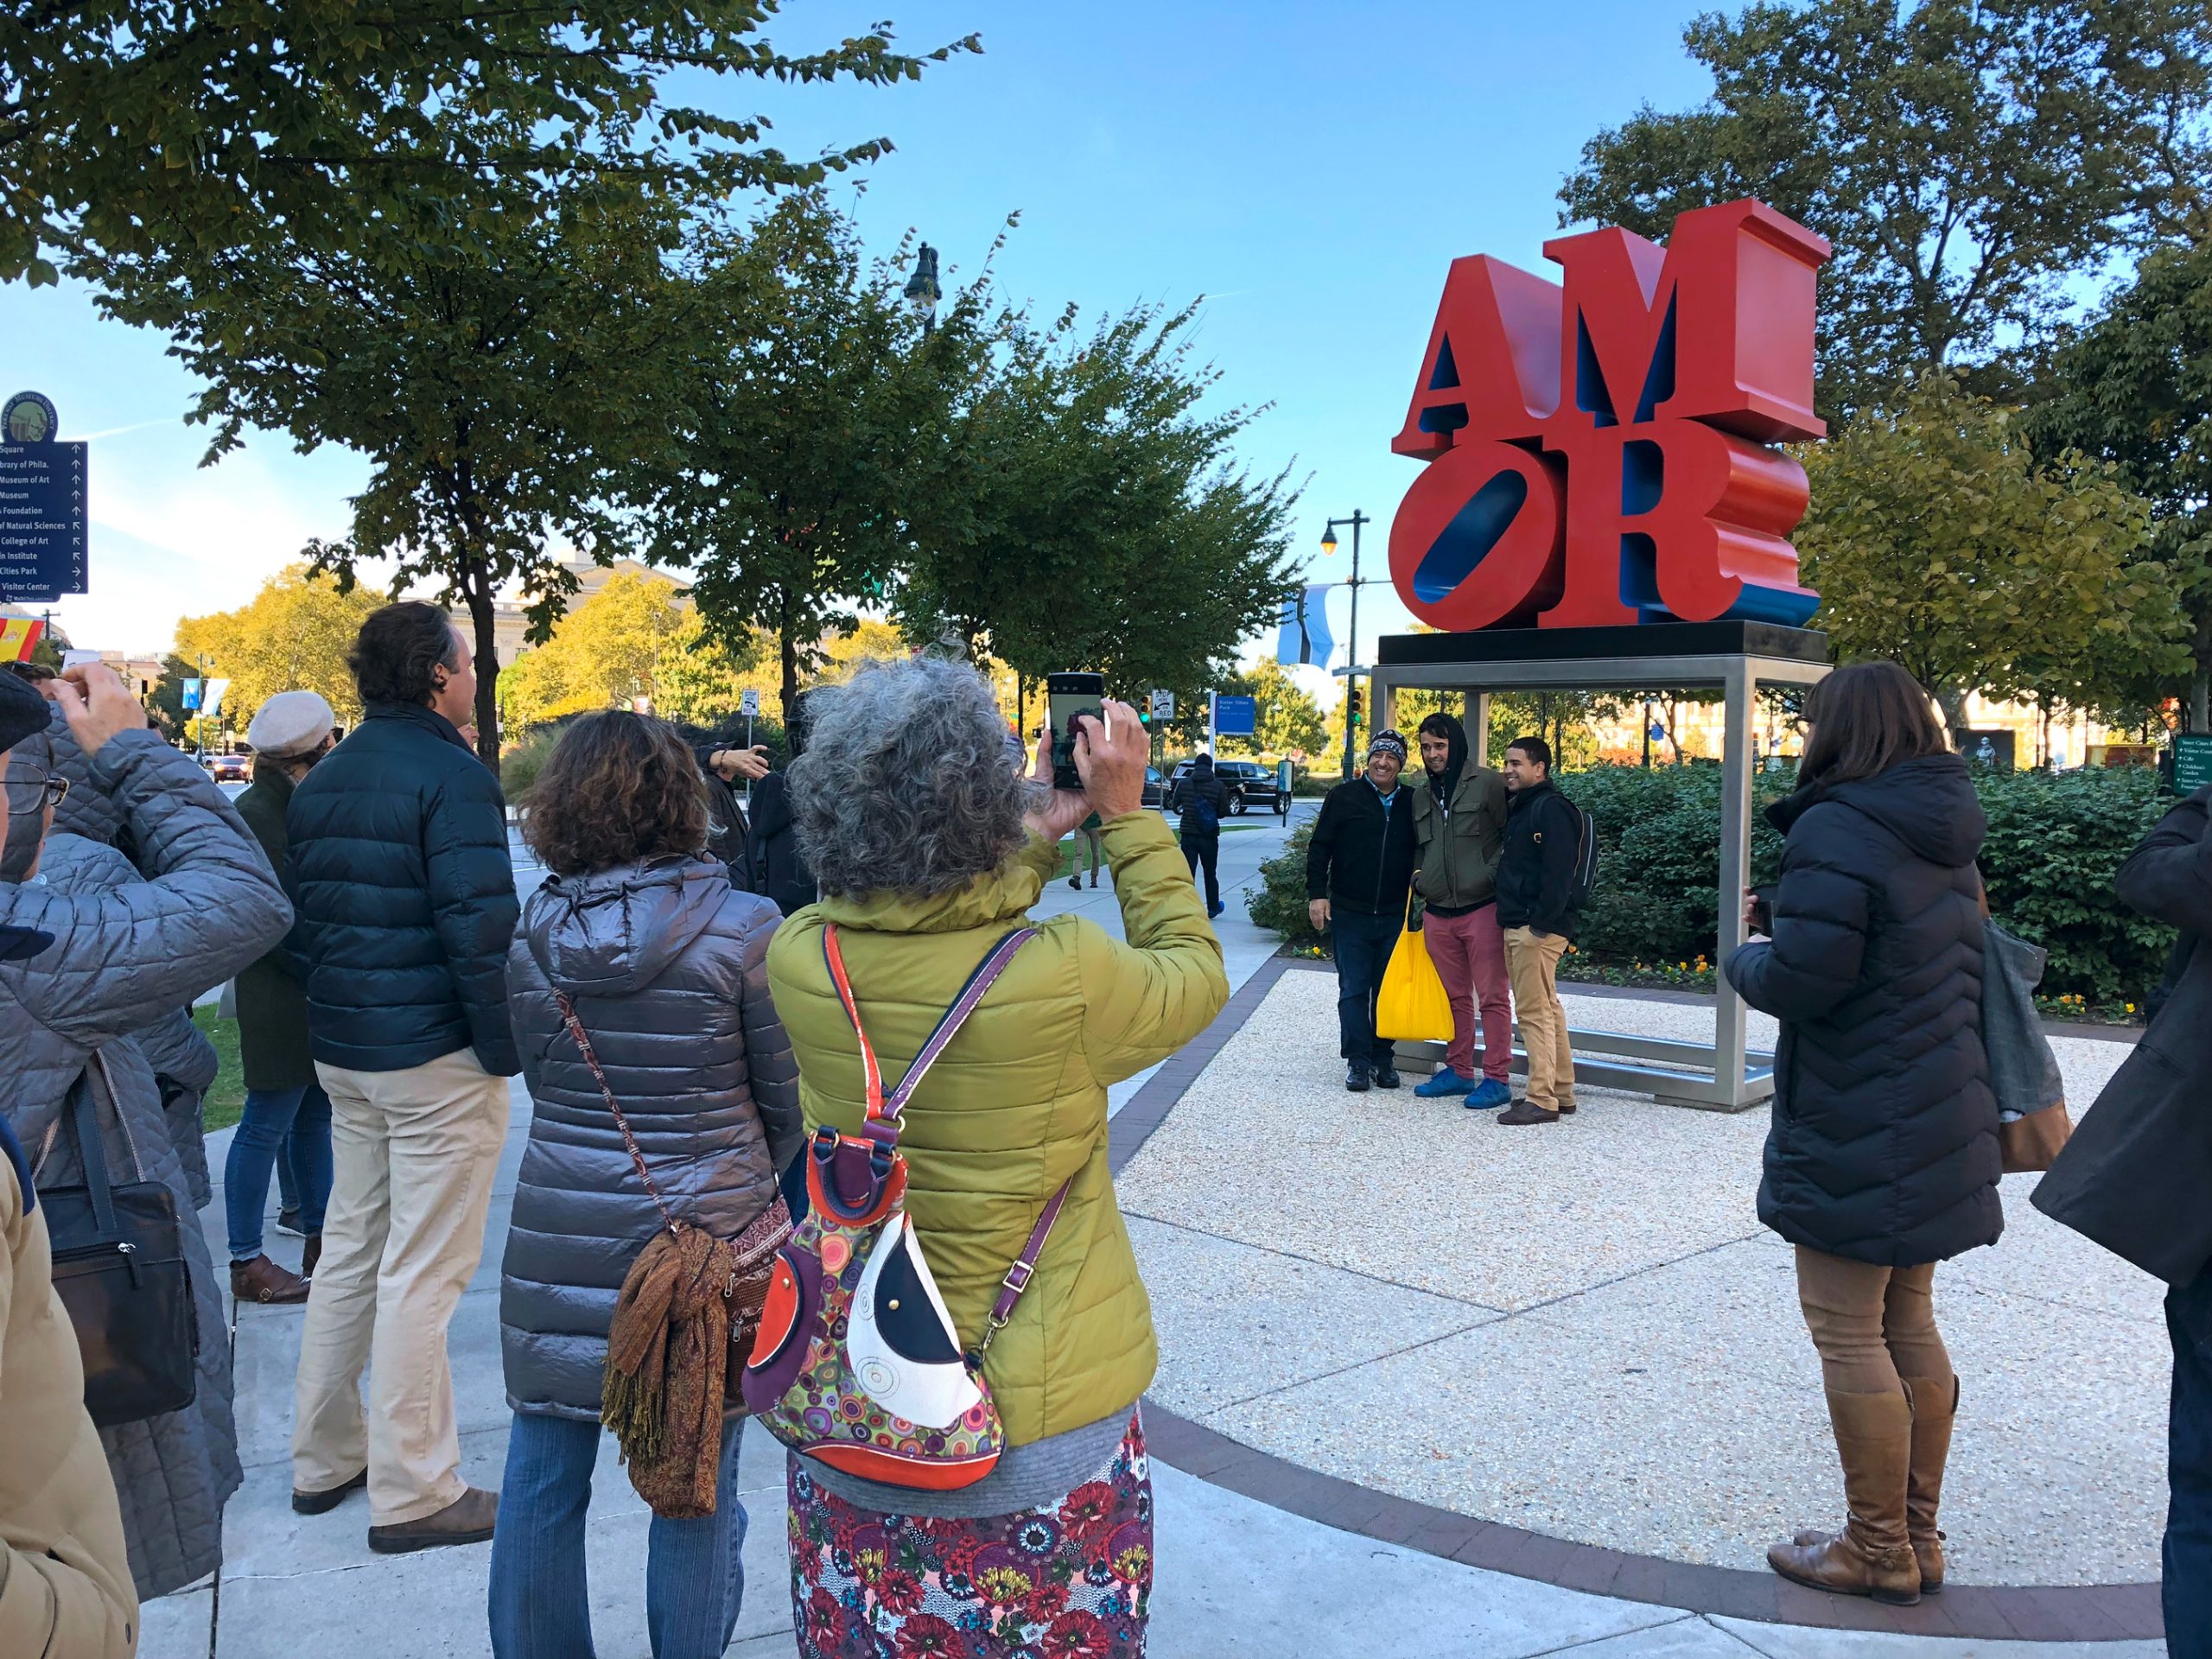 A group tour on the Benjamin Franklin Parkway stops to take photos at Robert Indiana's "AMOR" scupture - bright red staked letters that spell A-M-O-R on a tall metal frame base